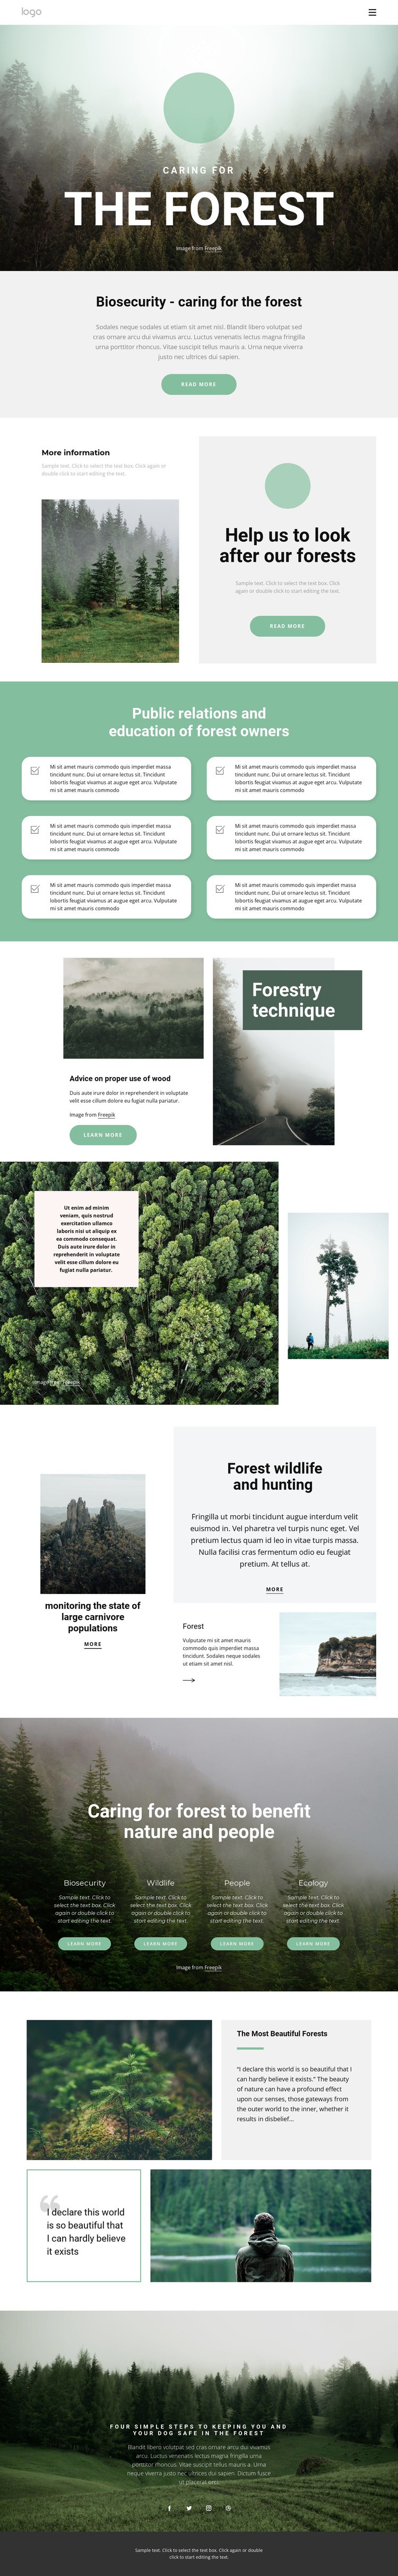 Caring for parks and forests Squarespace Template Alternative